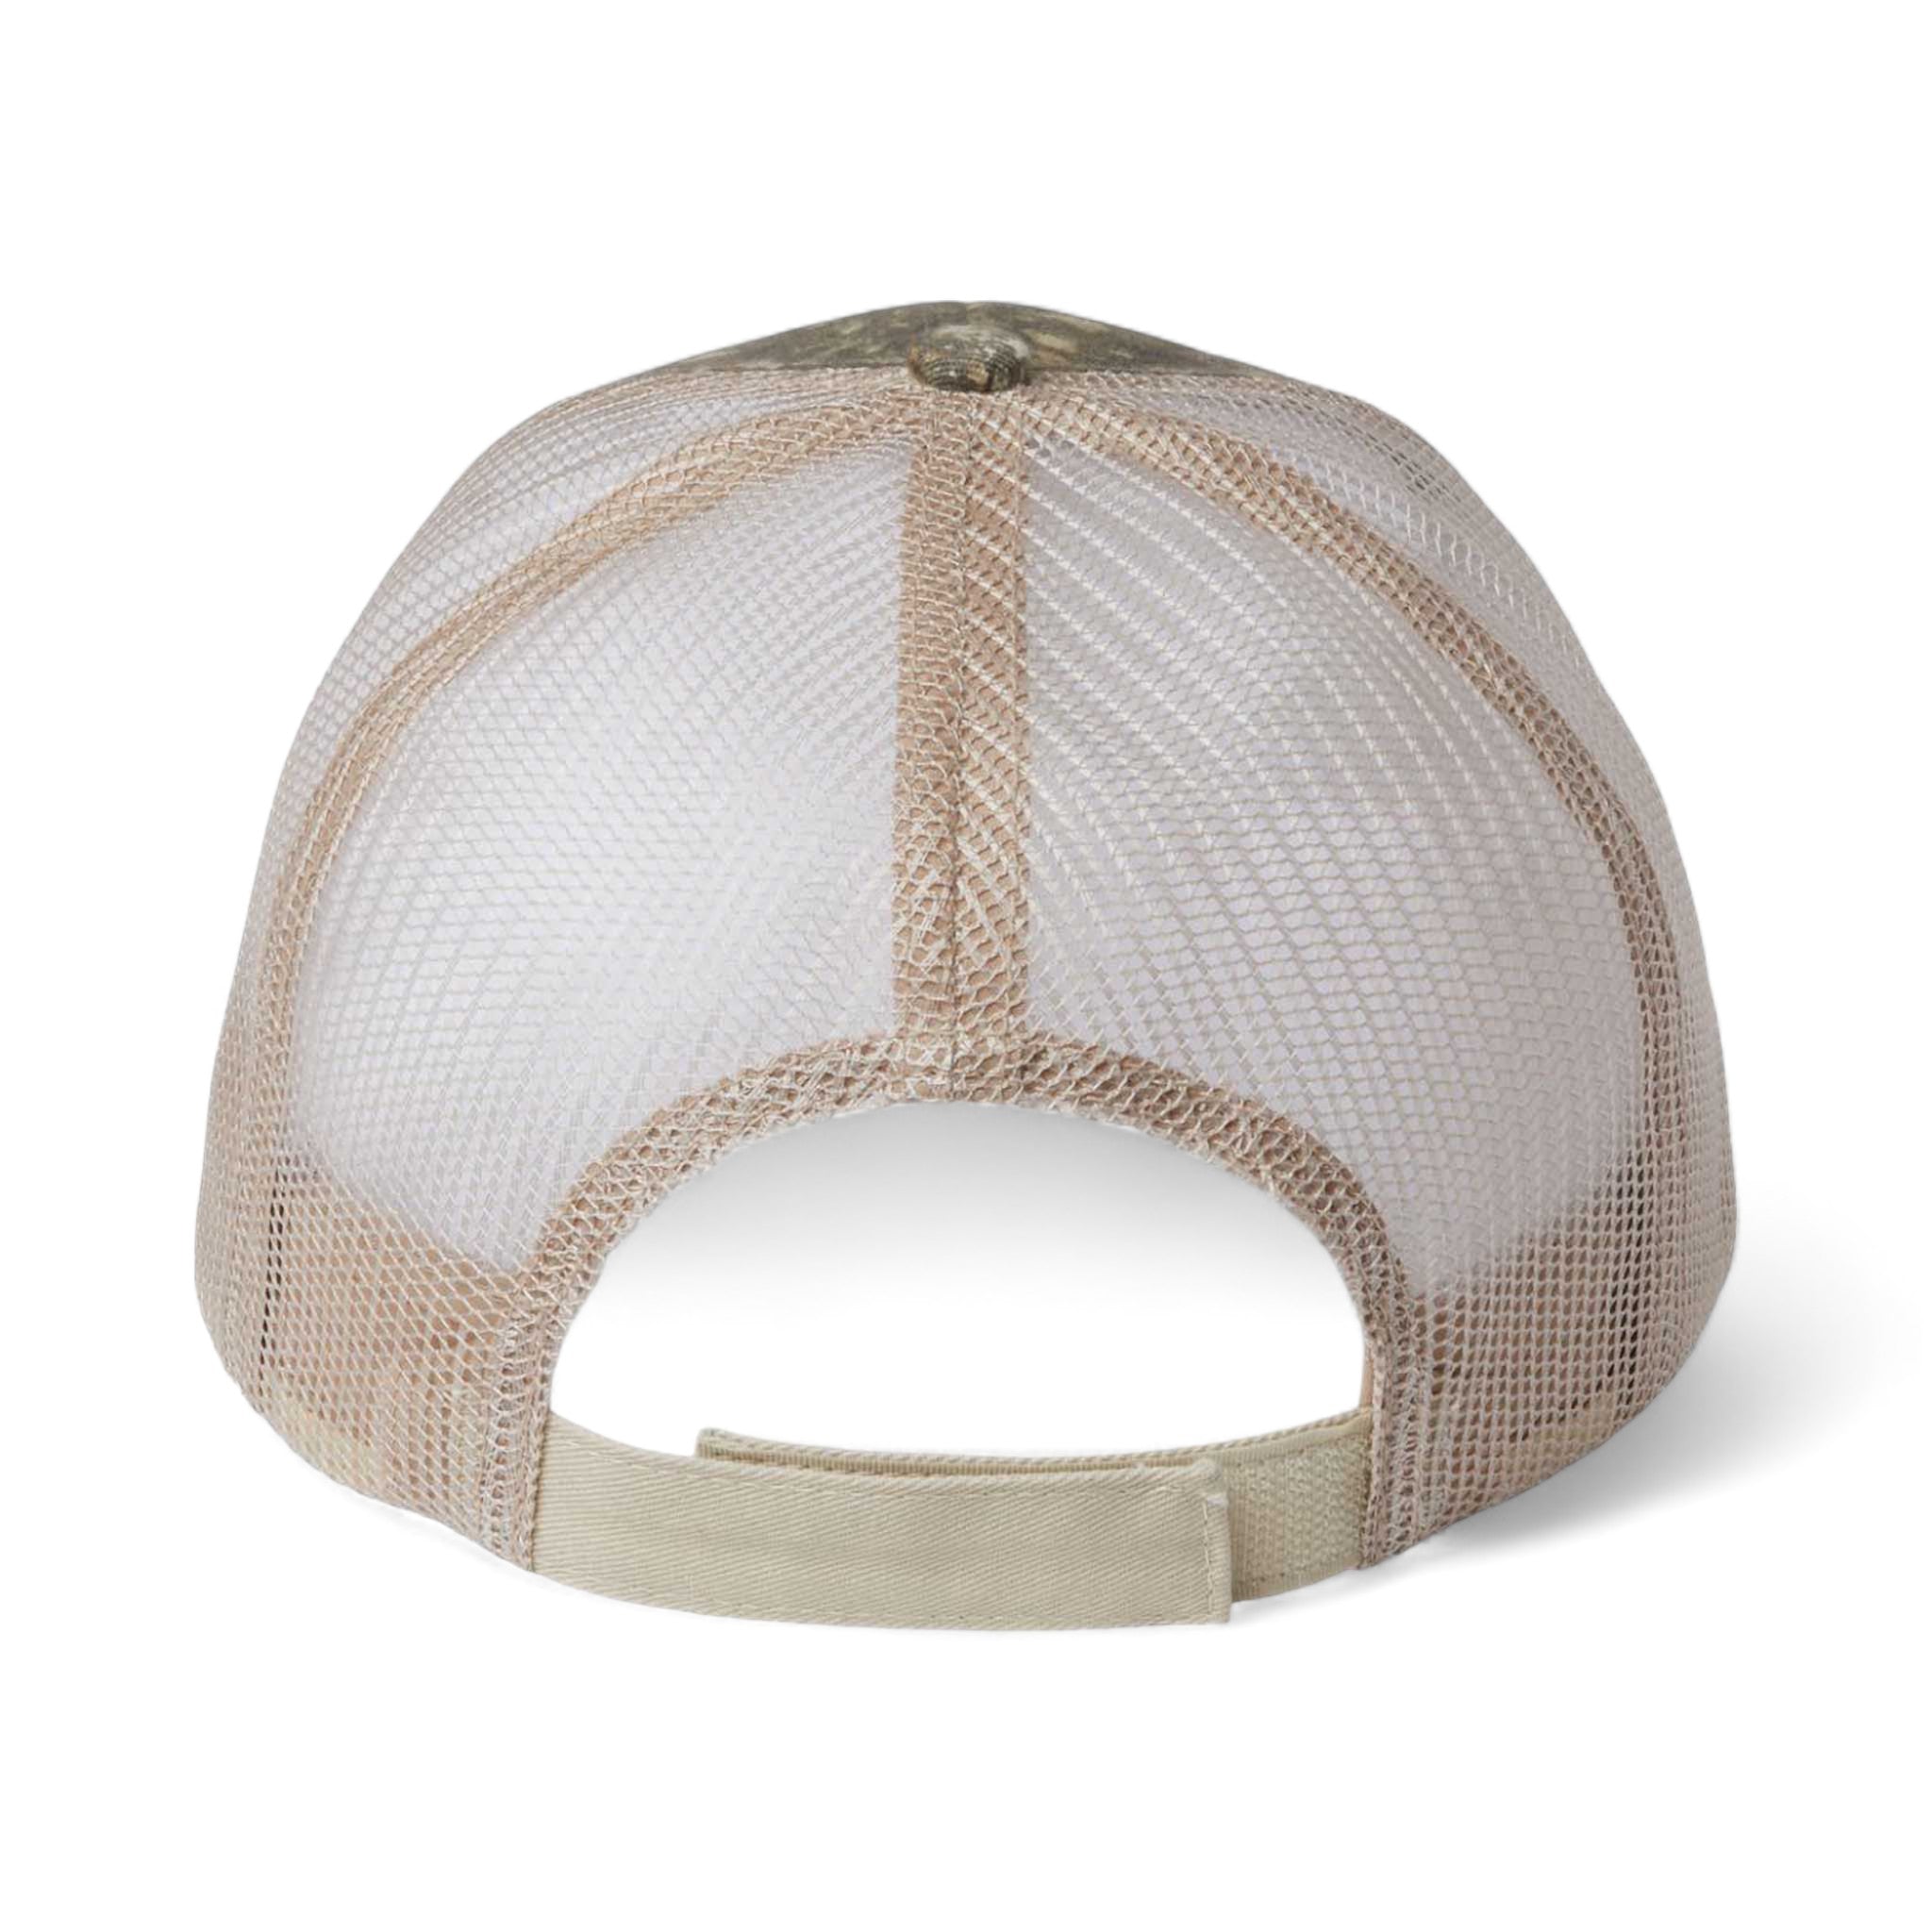 Back view of Kati LC5M custom hat in new timber and tan